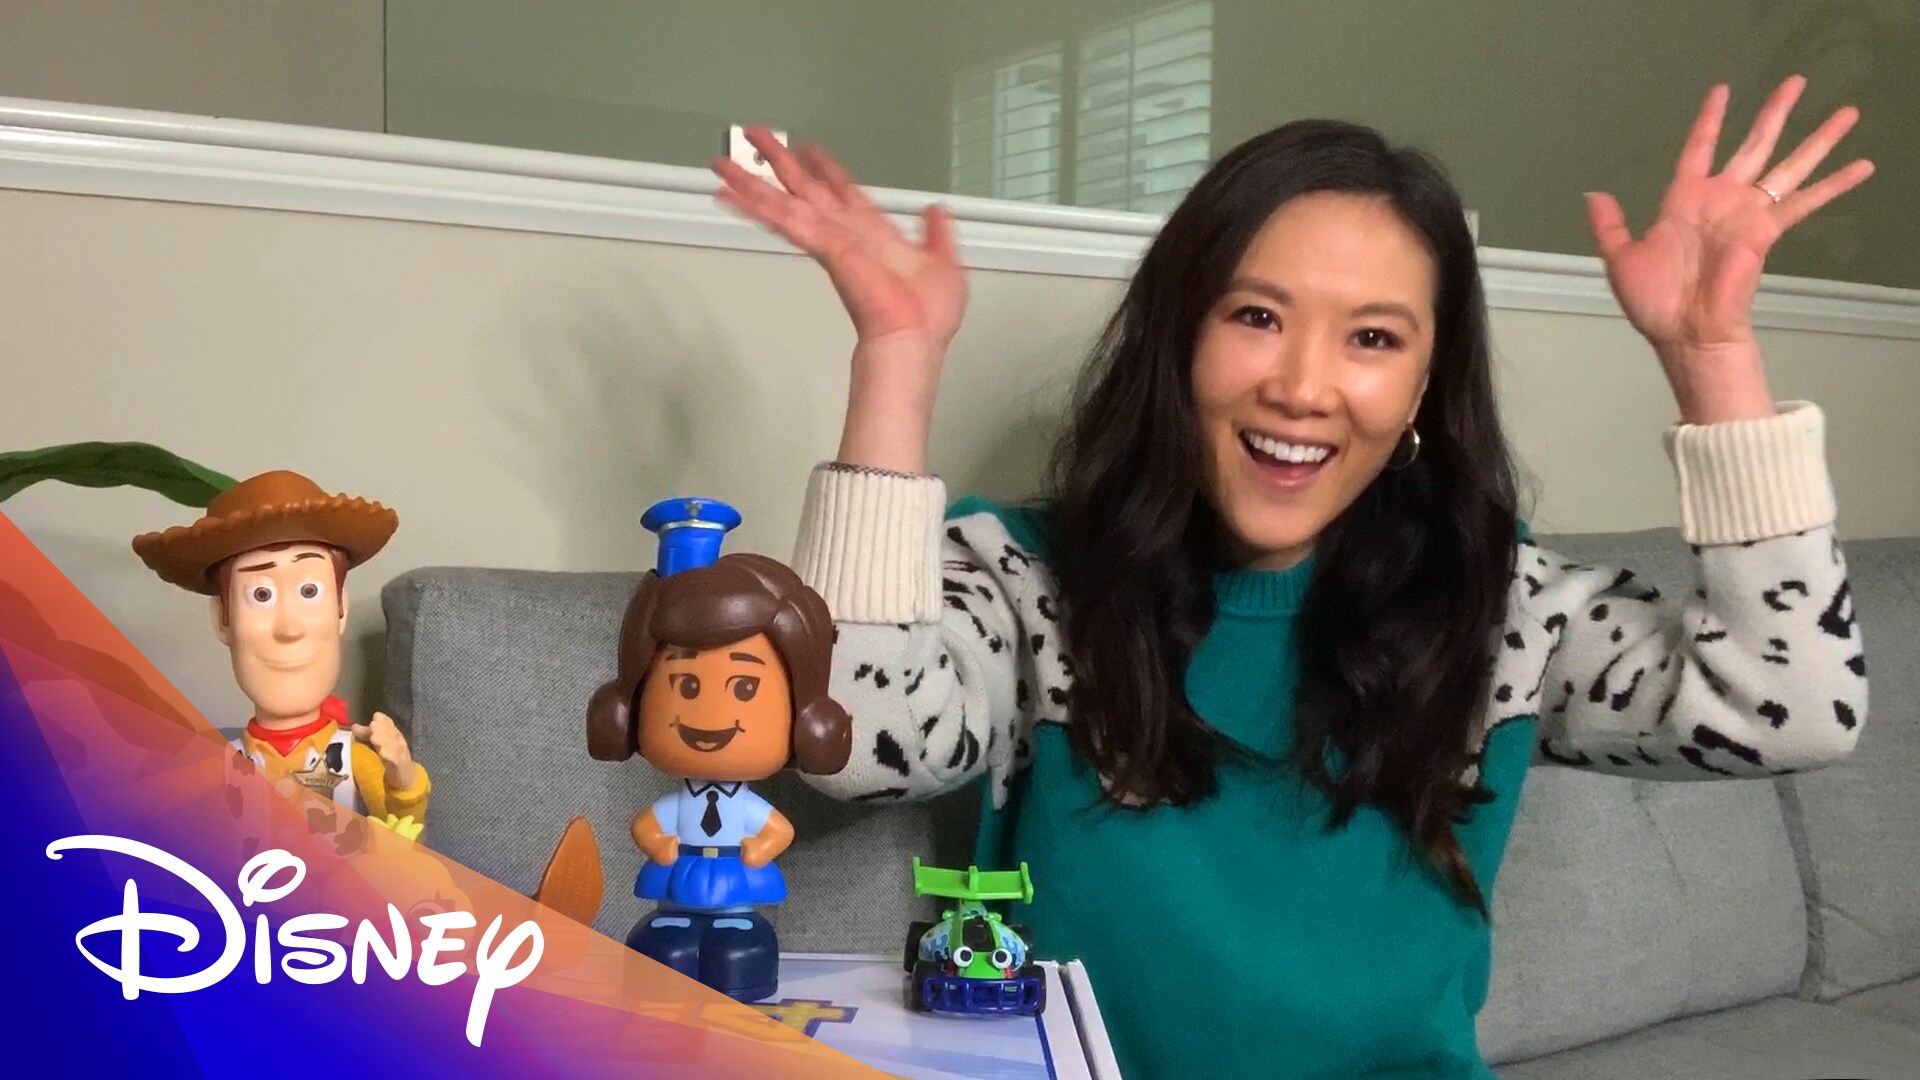 Join Toy Story 4’s Tony Hale and Ally Maki for Two Disney Storytime Readings